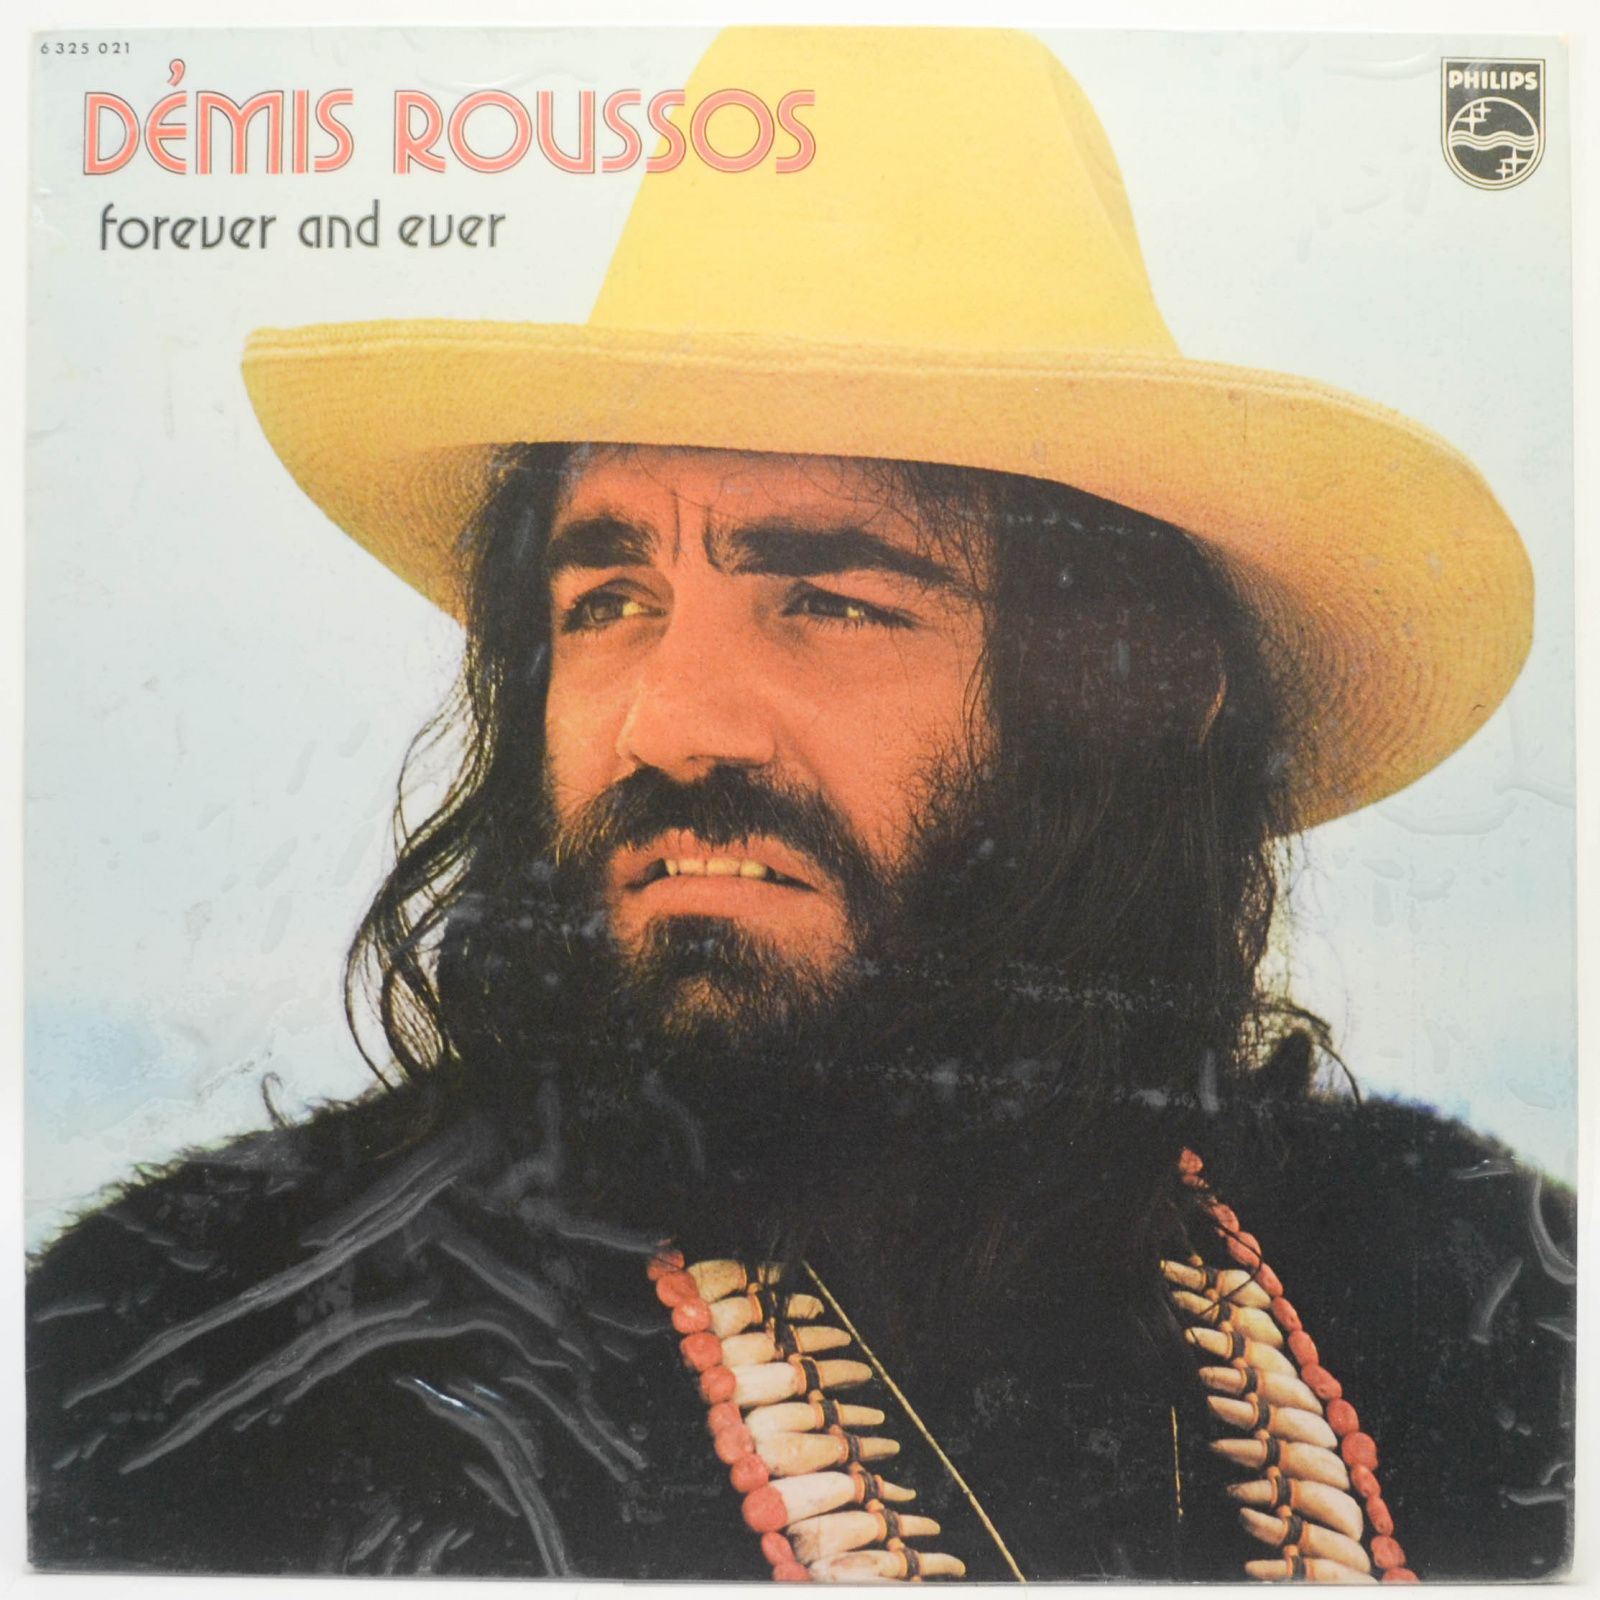 Demis Roussos — Forever And Ever, 1973